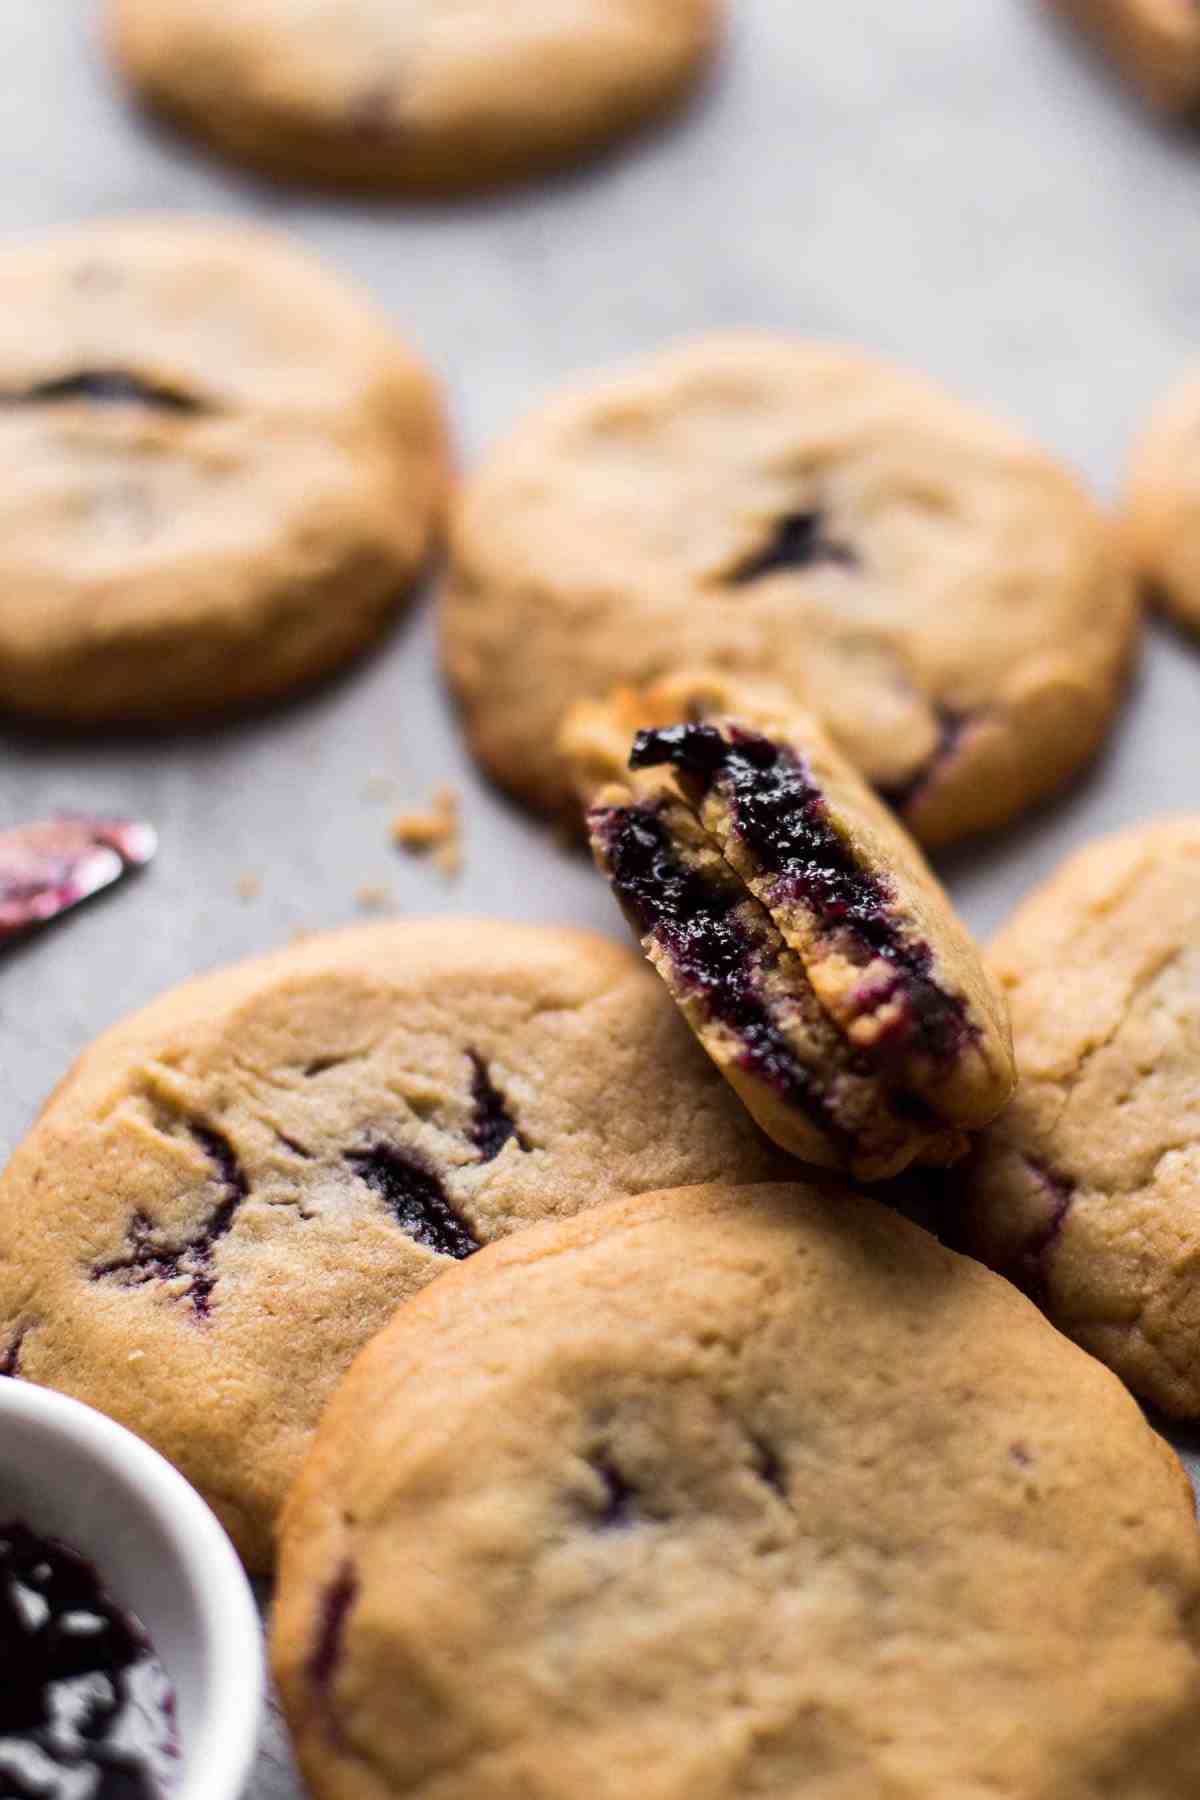 Broken Peanut Butter Jelly Cookie from the side